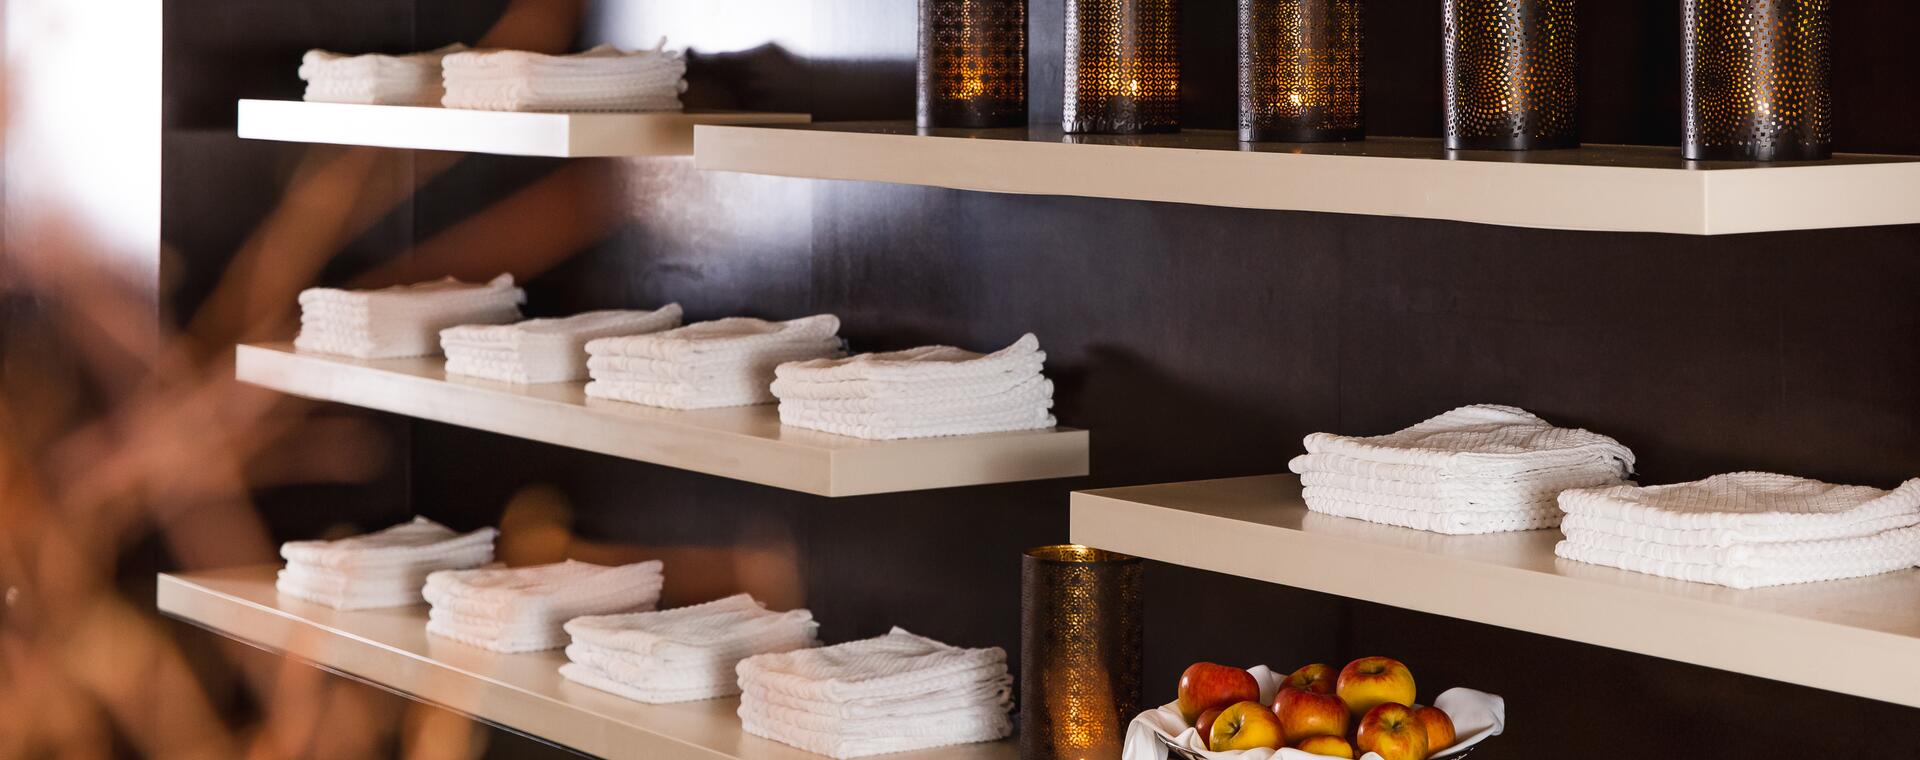 shelves in the hotel with wellness area